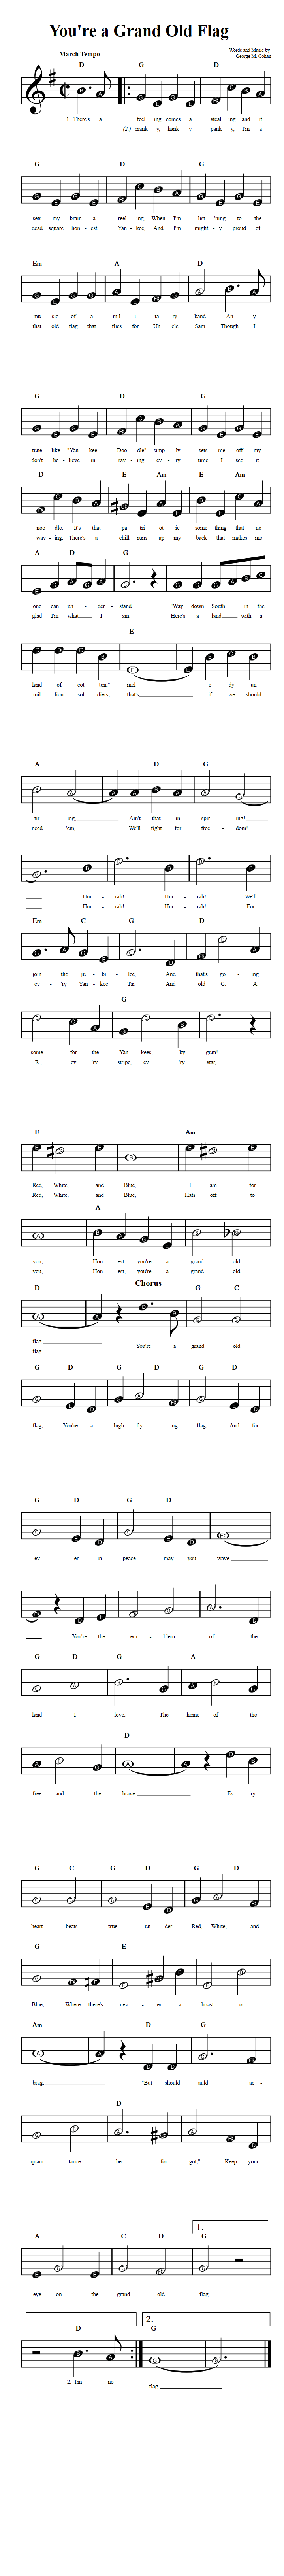 You're a Grand Old Flag  Beginner Sheet Music